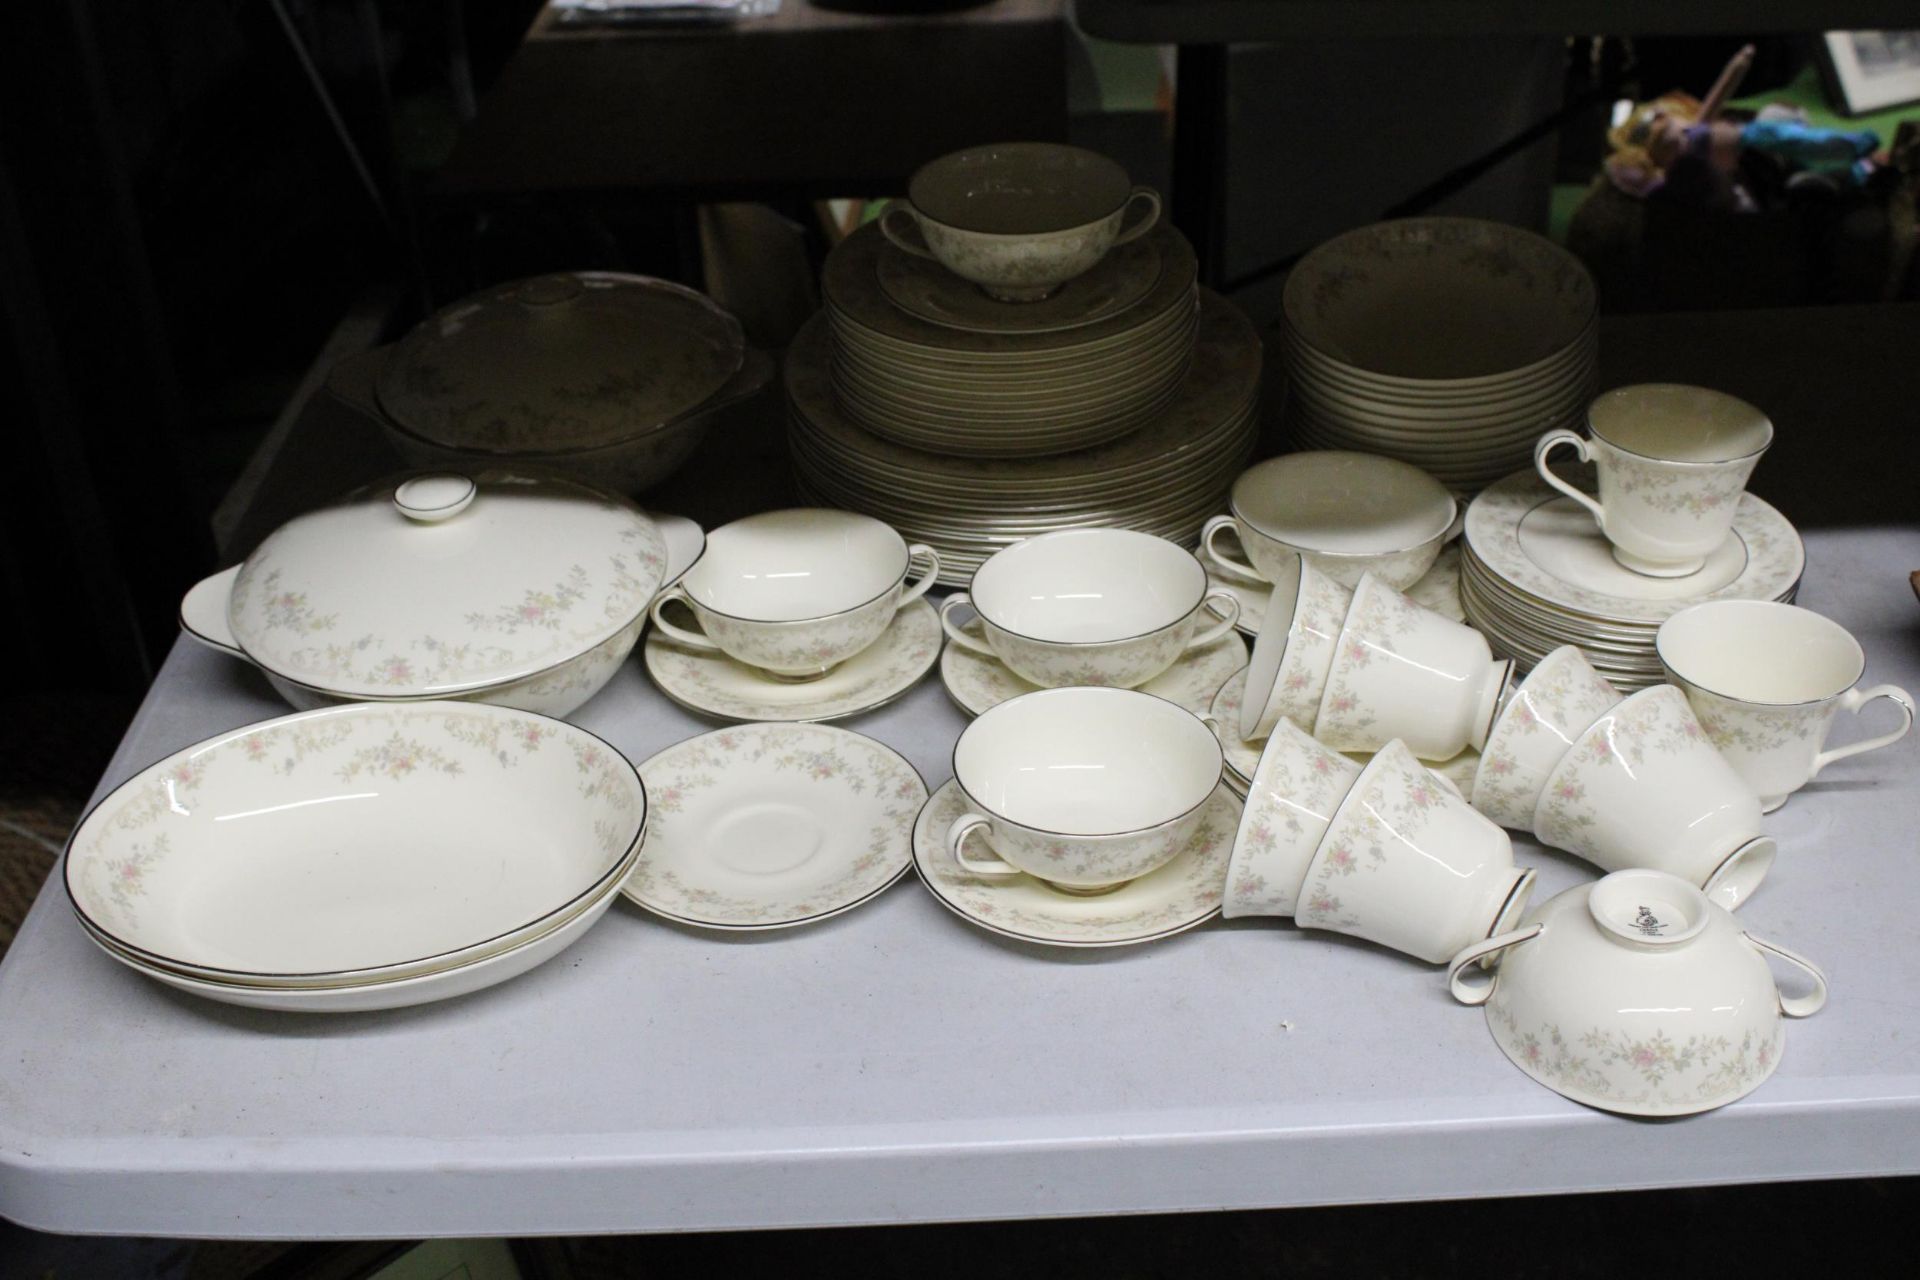 A ROYAL DOULTON 'DIANA' DINNER SERVICE TO INCLUDE SERVING TUREENS, VARIOUS SIZES OF PLATES, SOUP